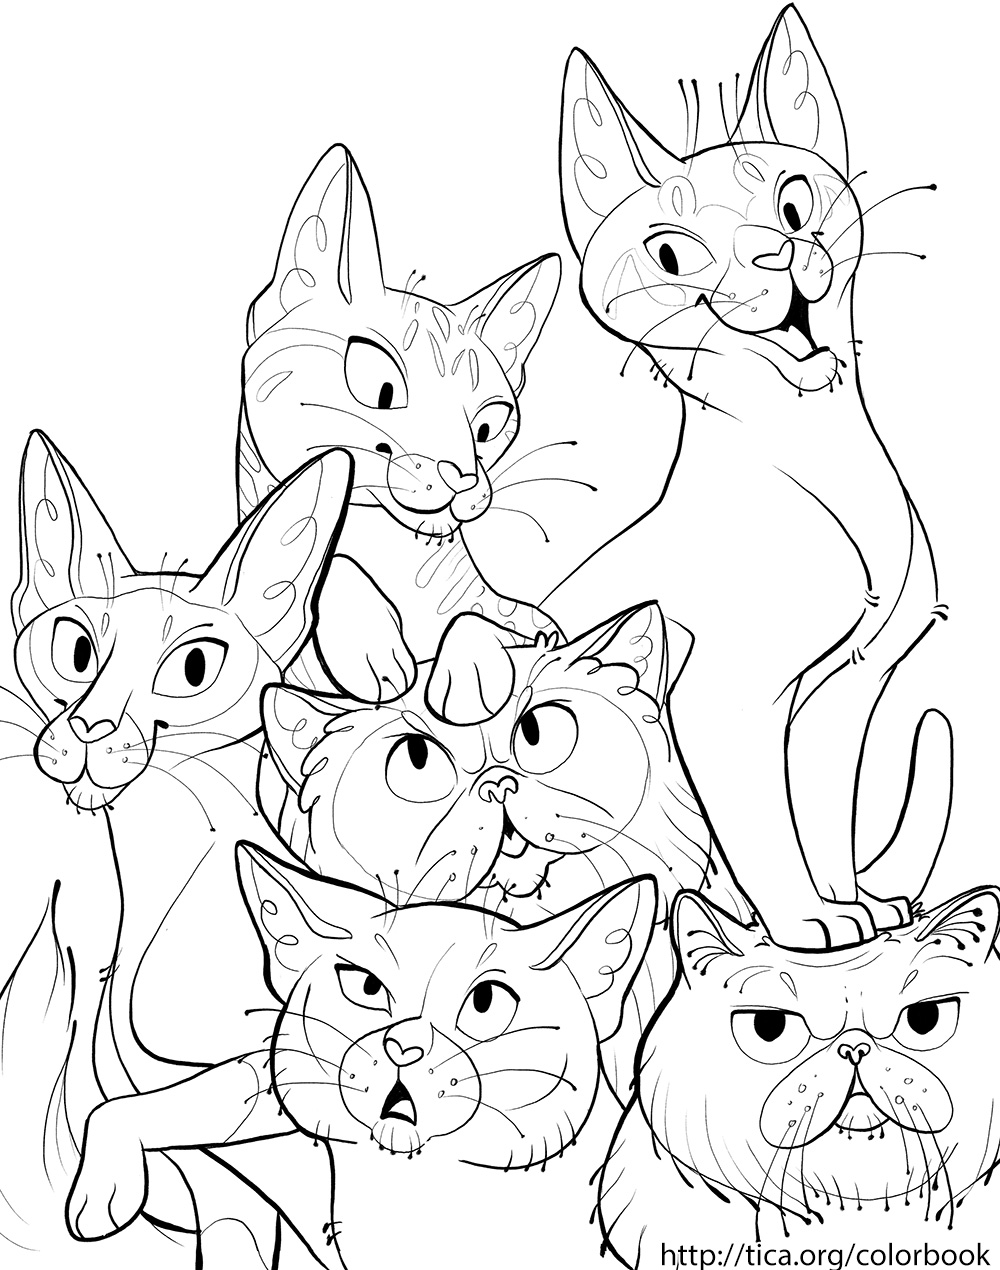 TICA Cat Coloring Book Page 6